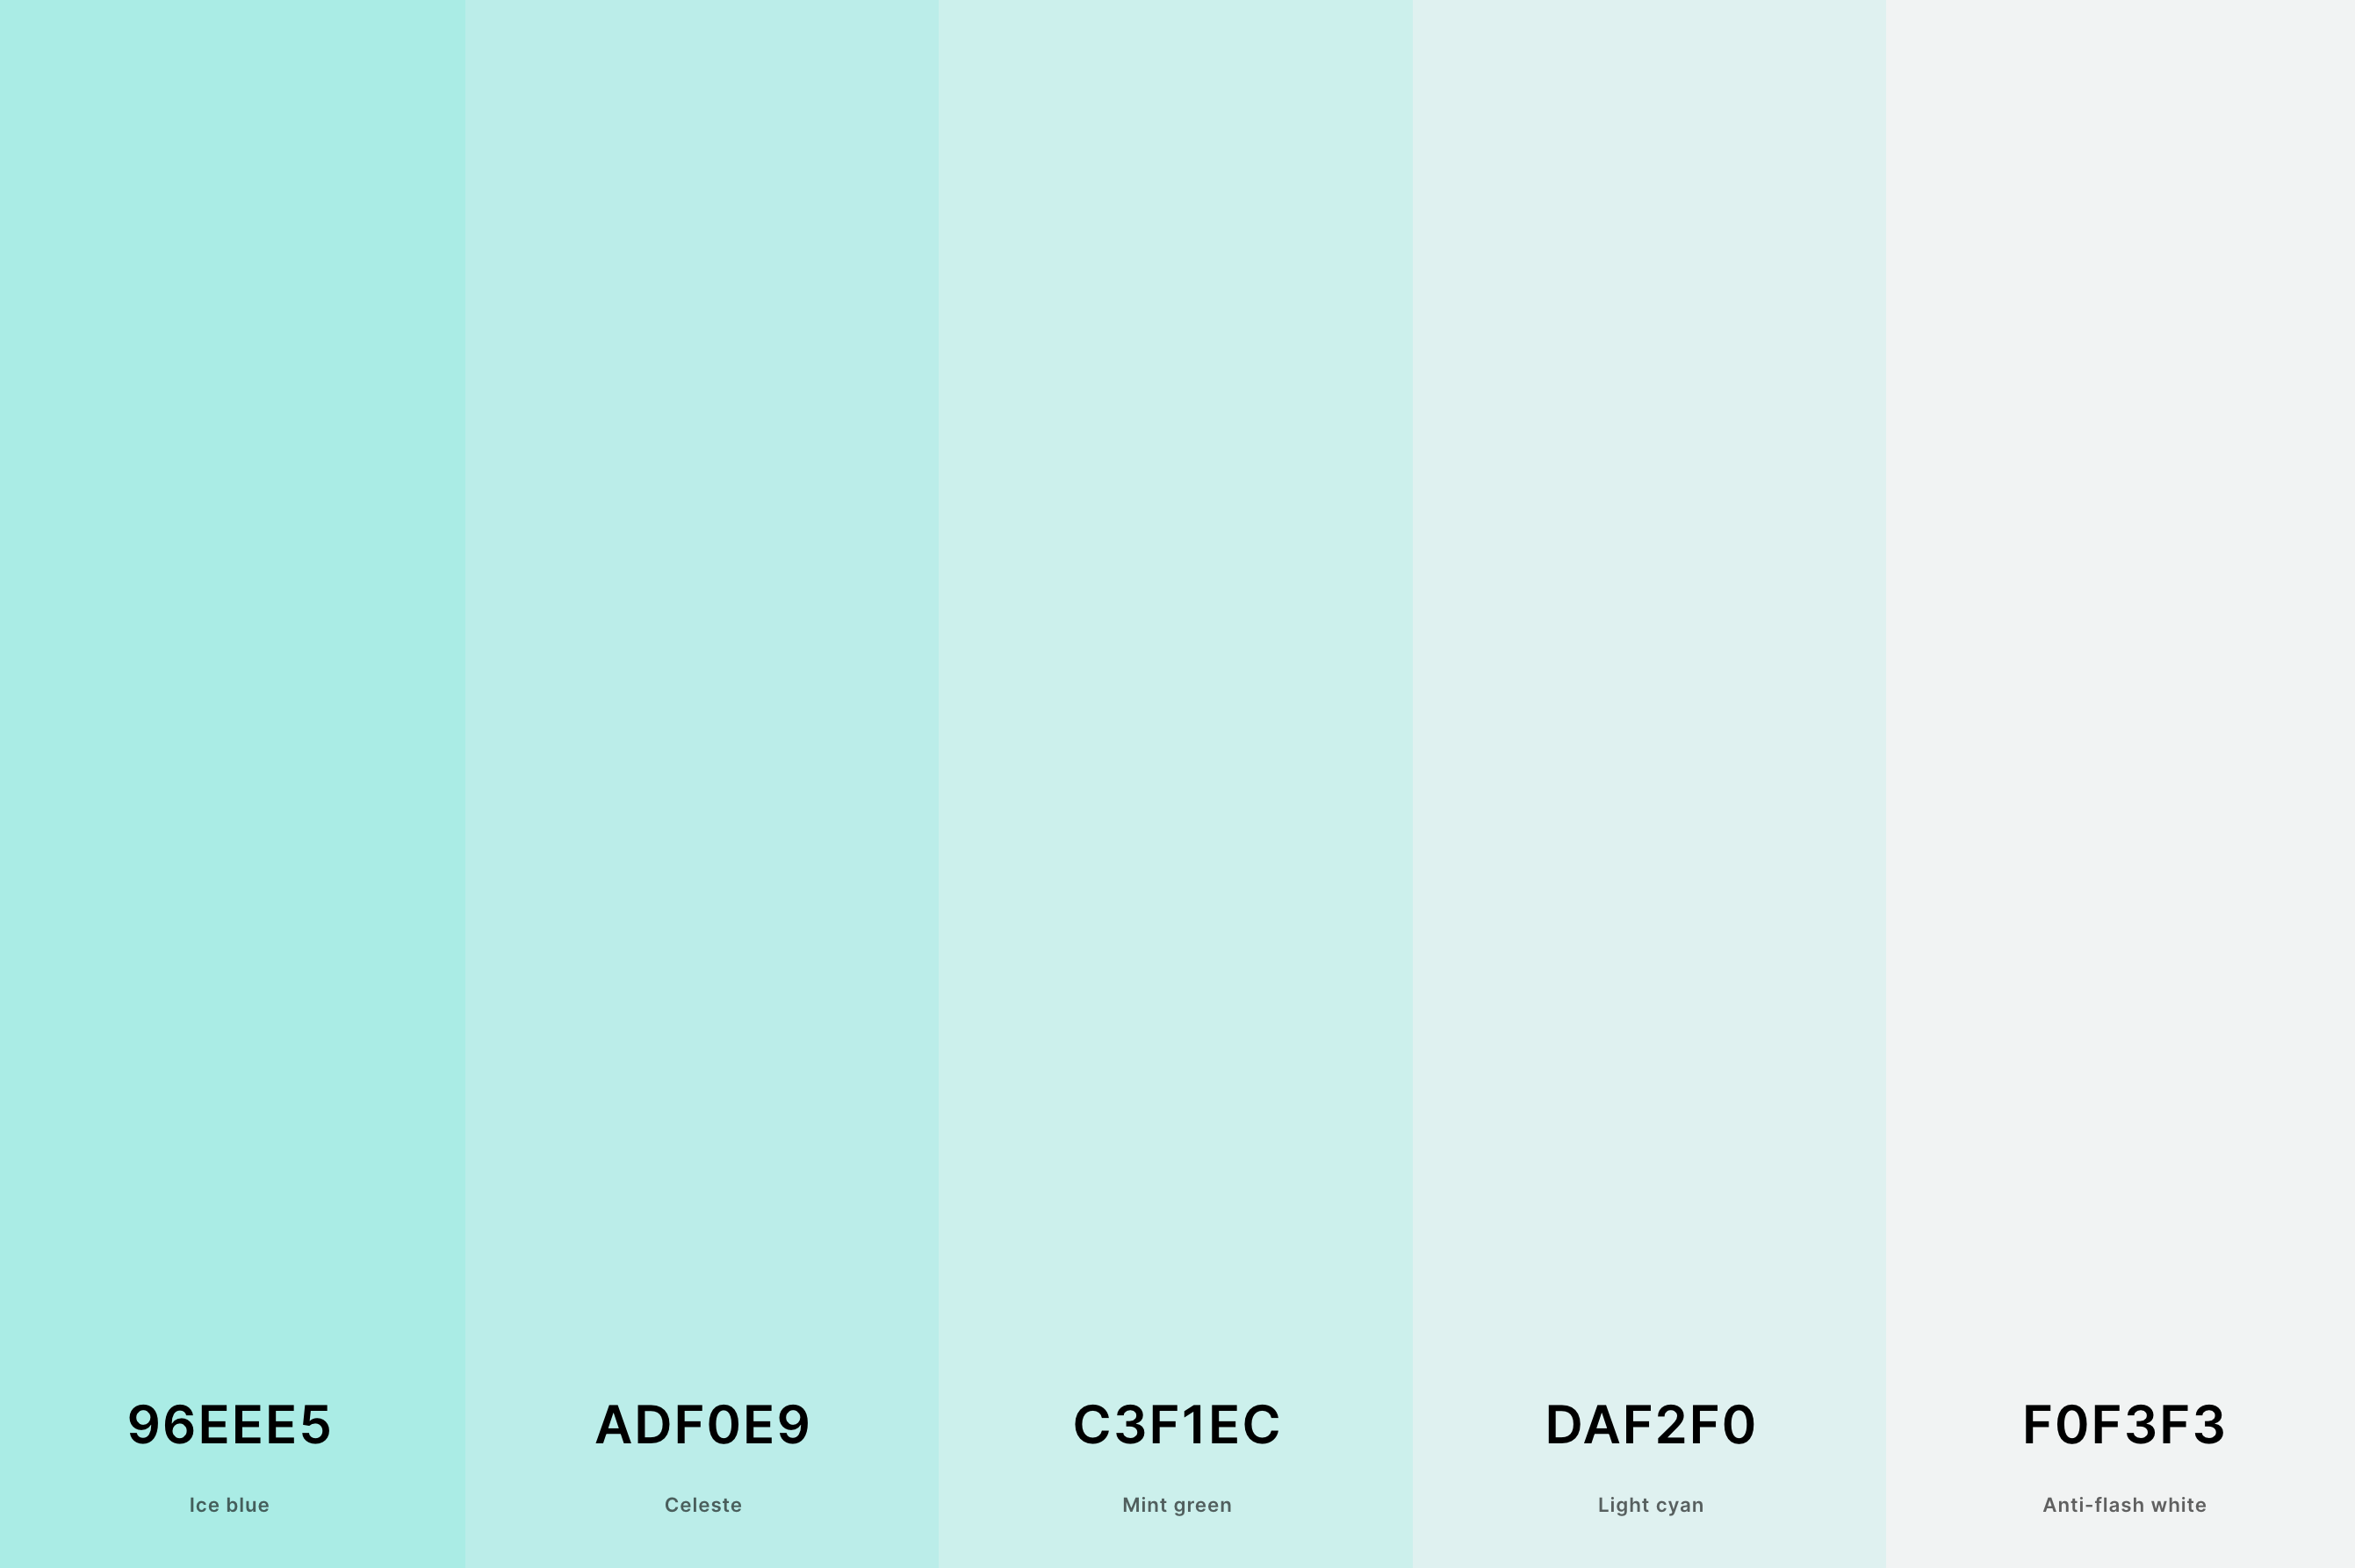 26. Pale Turquoise Color Palette Color Palette with Ice Blue (Hex #96EEE5) + Celeste (Hex #ADF0E9) + Mint Green (Hex #C3F1EC) + Light Cyan (Hex #DAF2F0) + Anti-Flash White (Hex #F0F3F3) Color Palette with Hex Codes